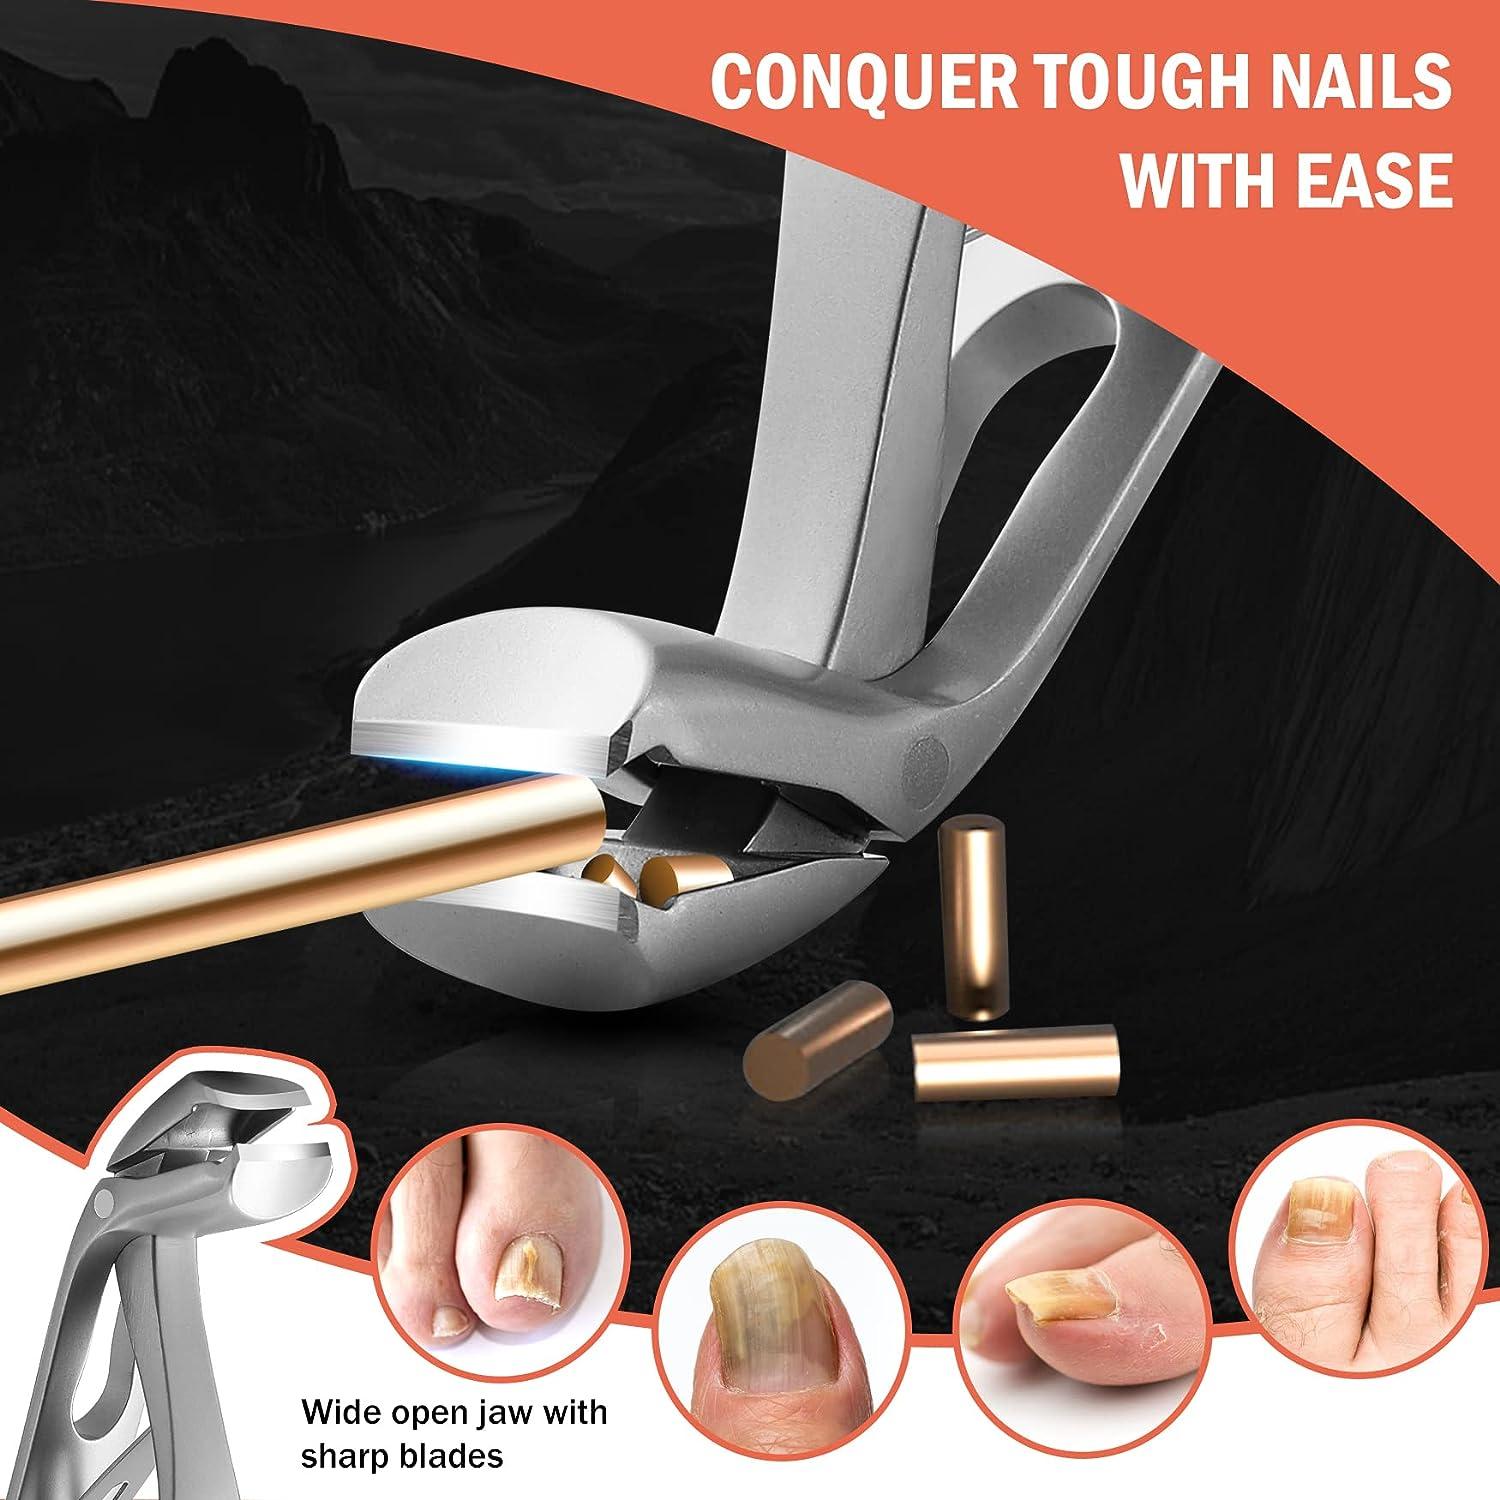 Choosing The Perfect Nail Clippers For Hard and Ingrown Nails